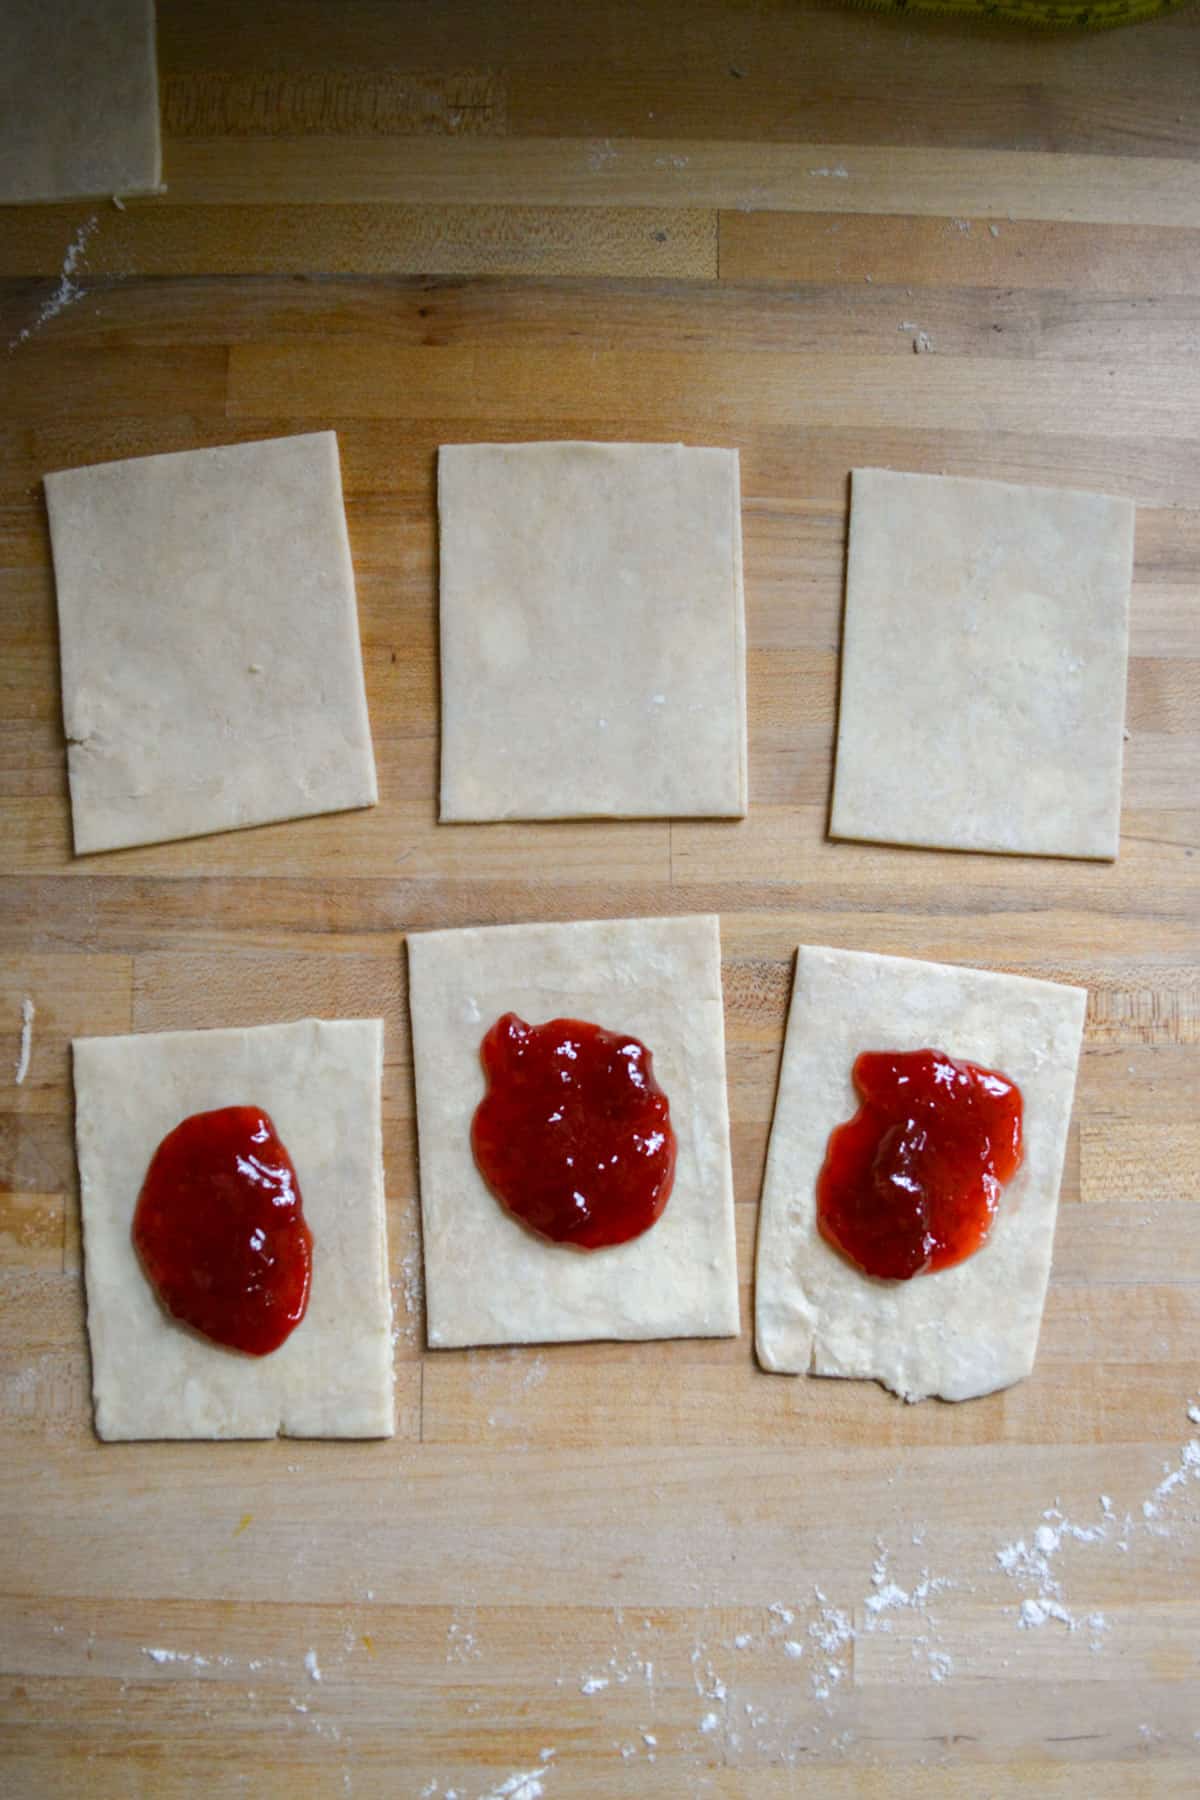 Strawberry jam on 3 pie dough rectangles and 3 rectangles with nothing on them.